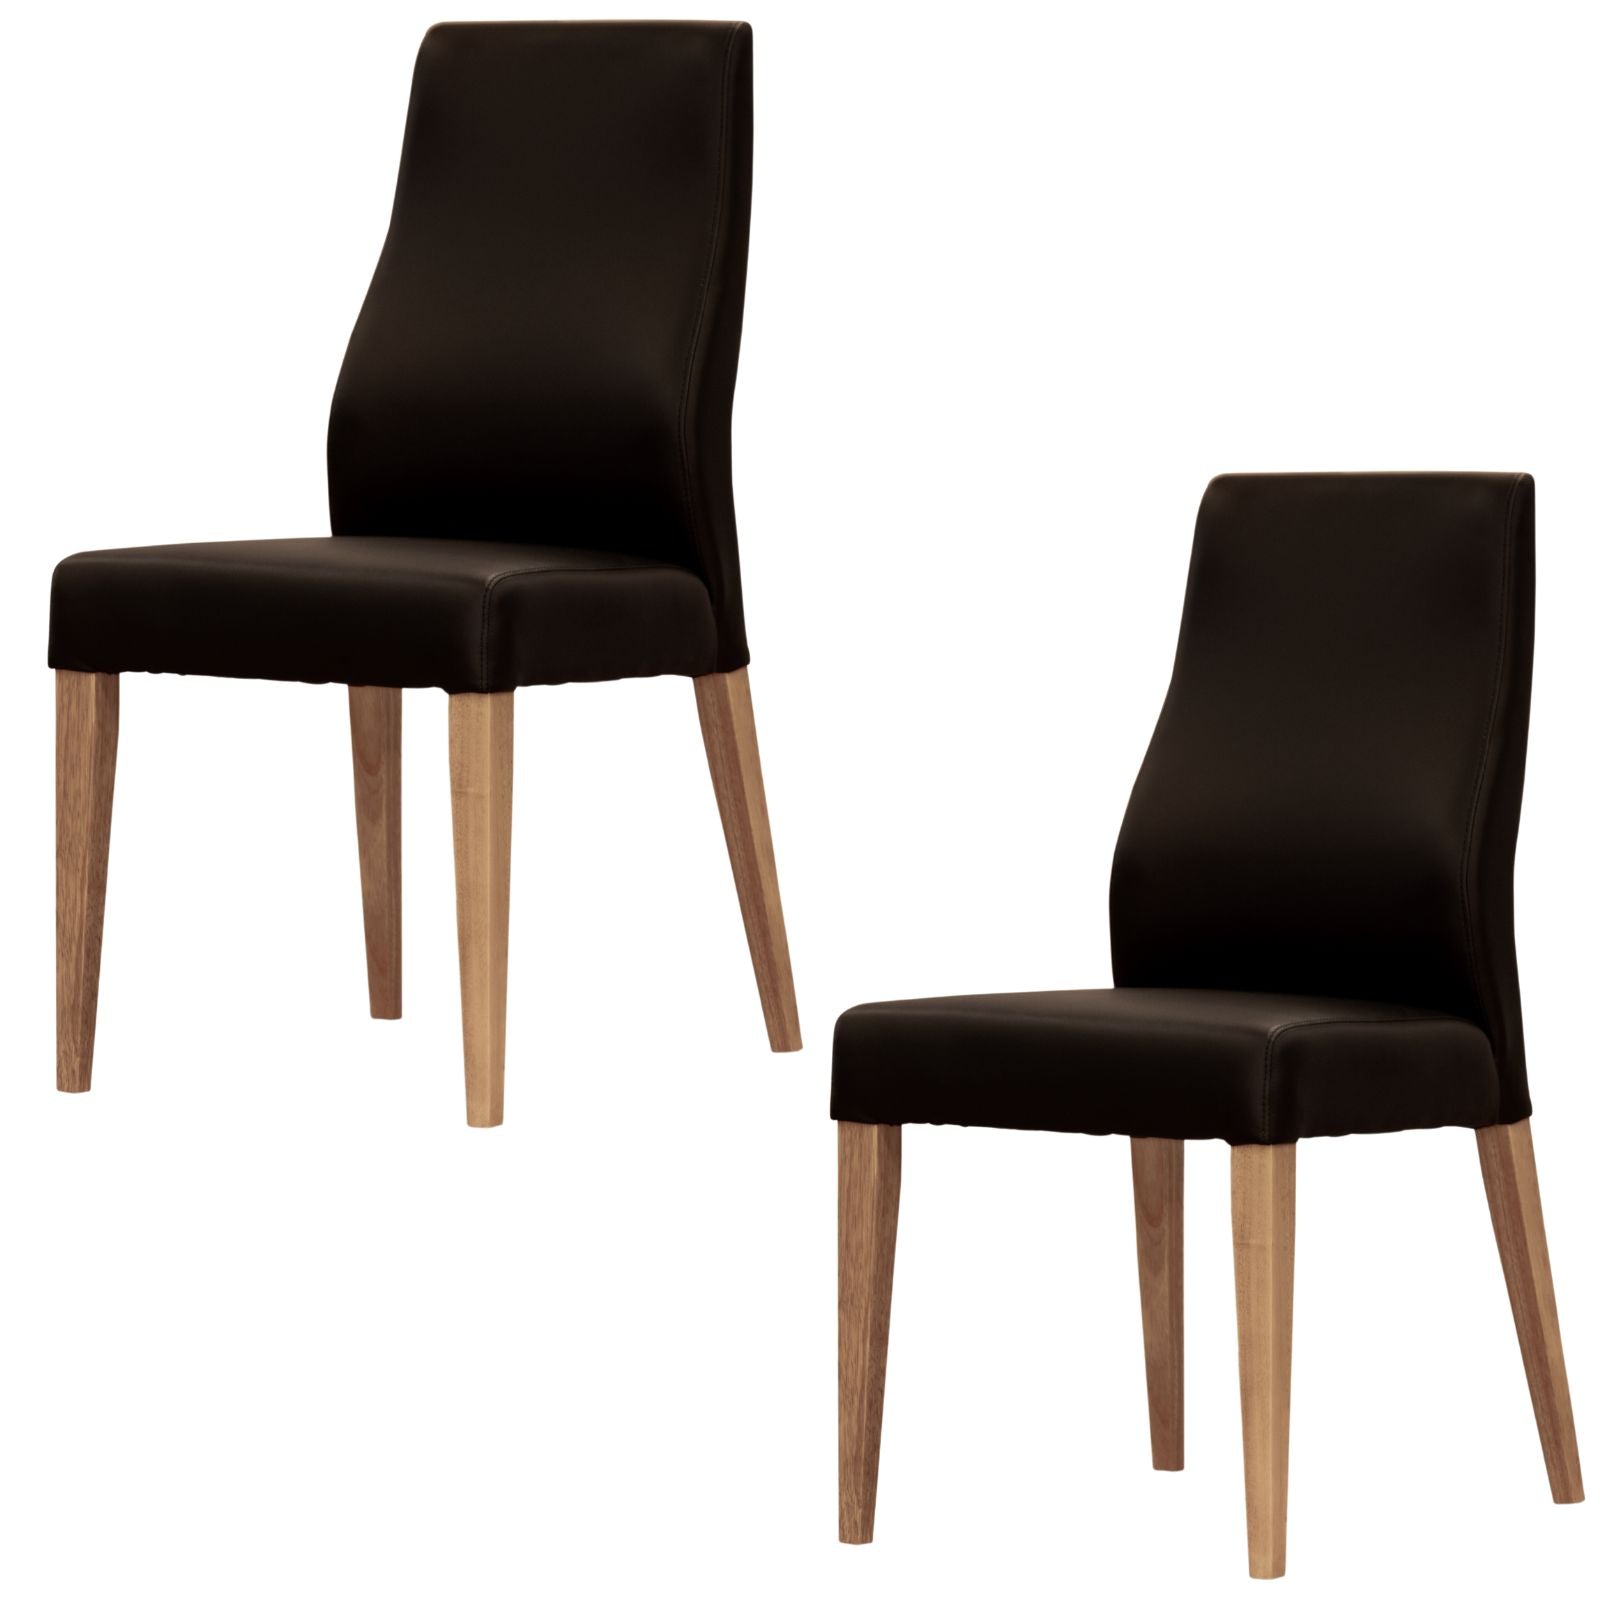 Rosemallow Dining Chair Set of 2 PU Leather Seat Solid Messmate Timber - Black